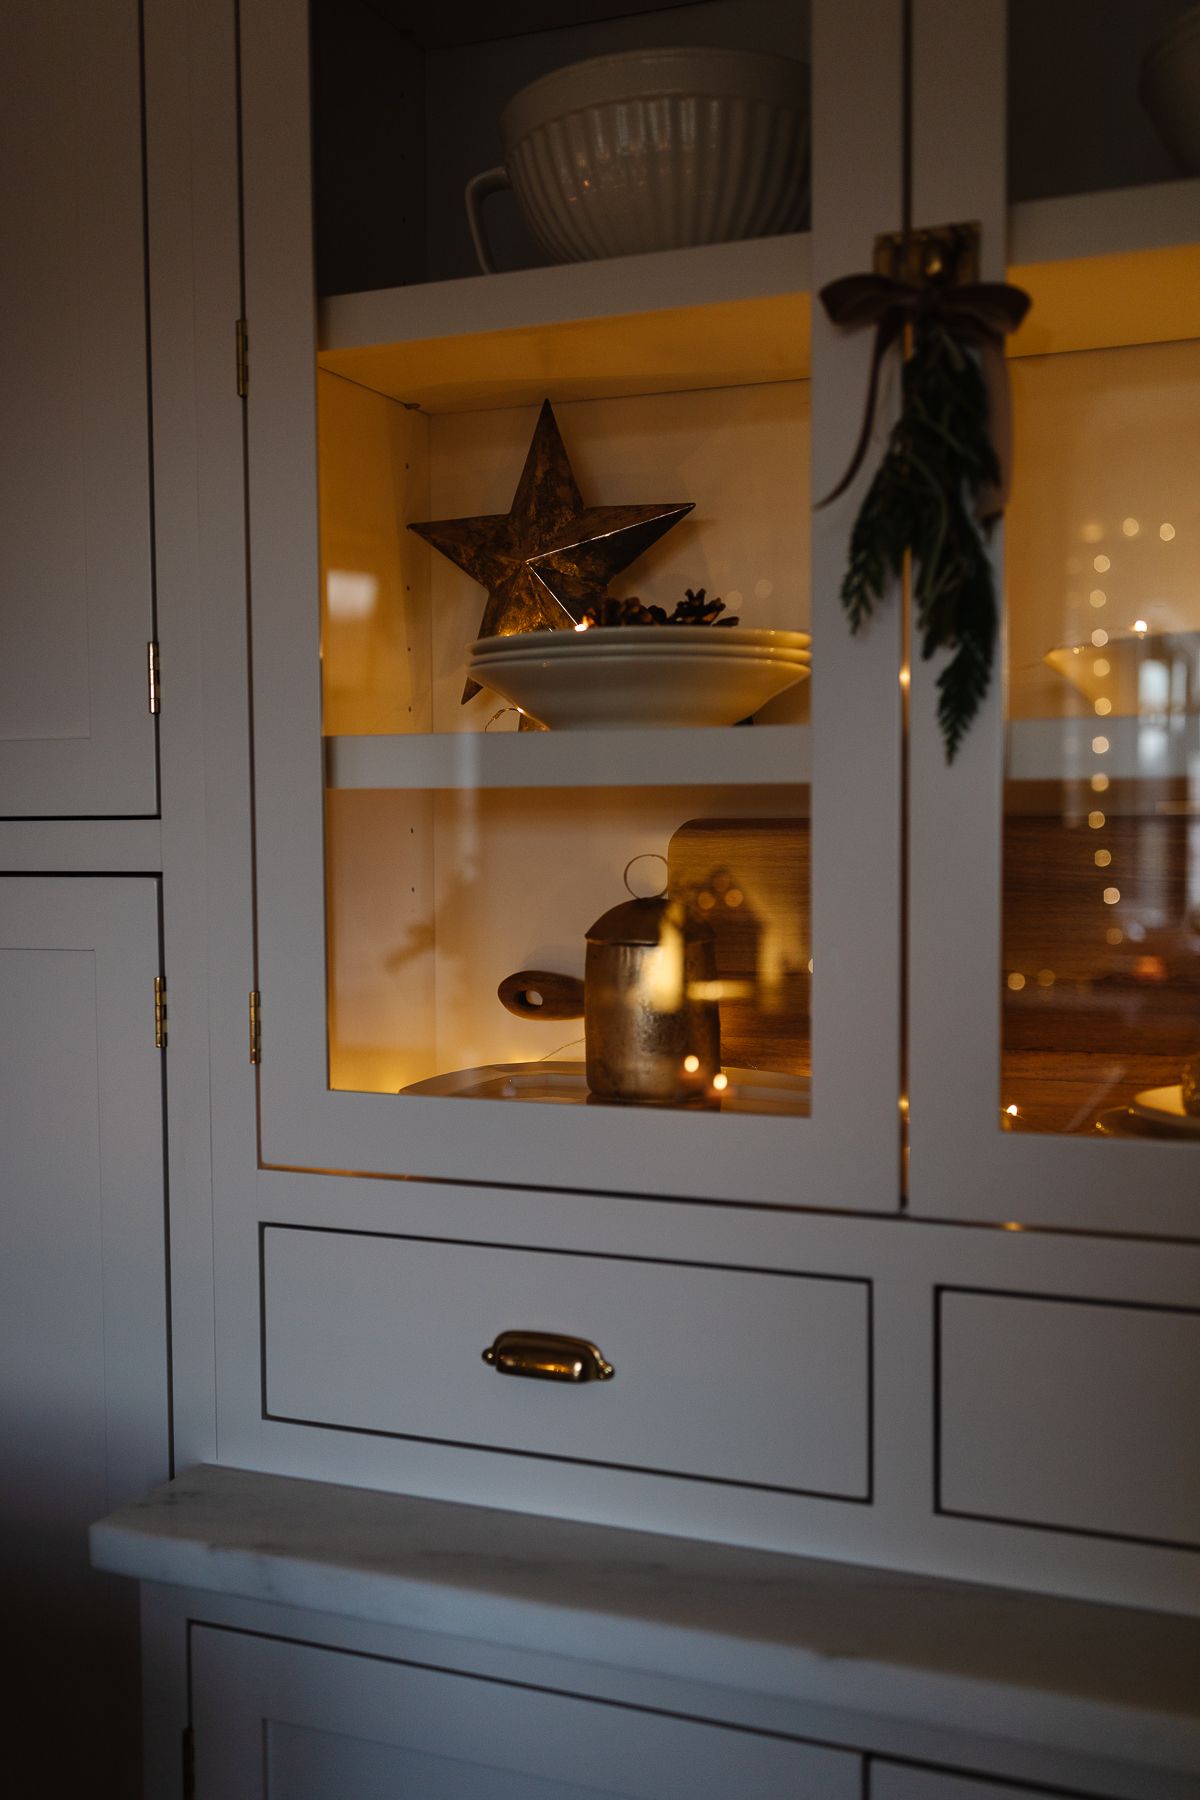 A cabinet in a kitchen with traditional Christmas decorations and lights inside.